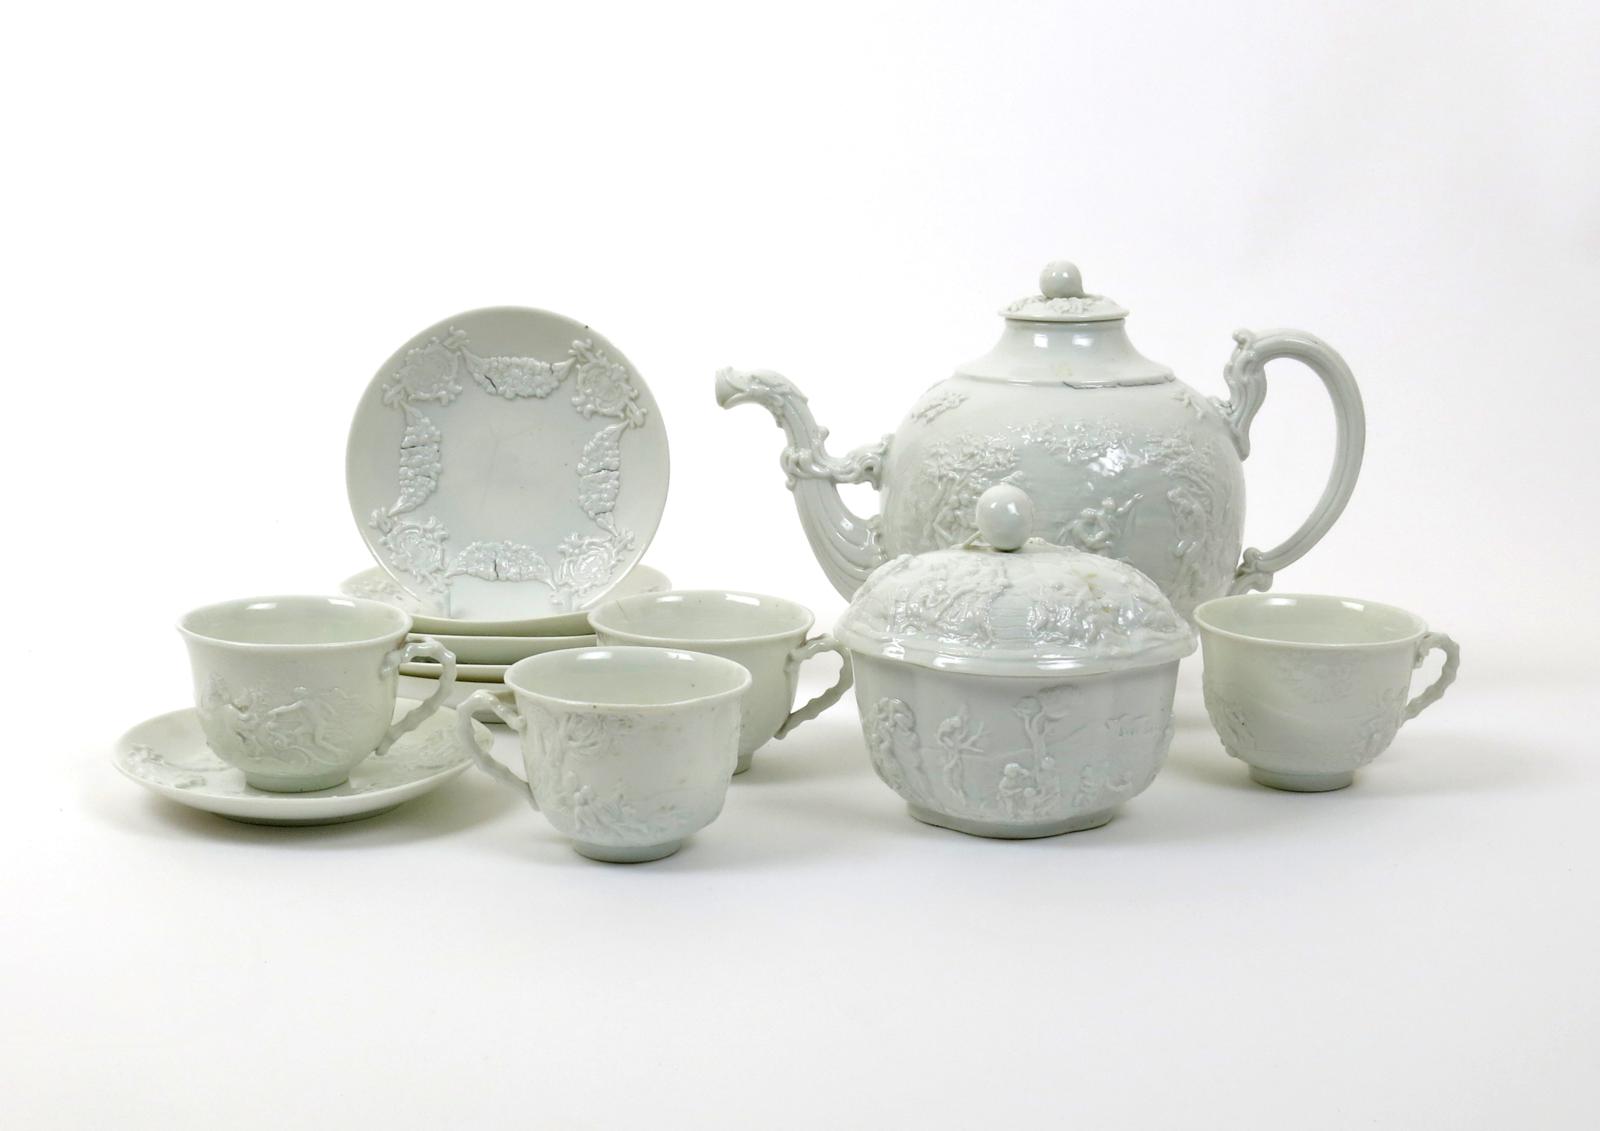 An Italian porcelain part tea service  19th century, moulded in the Doccia manner with scenes of